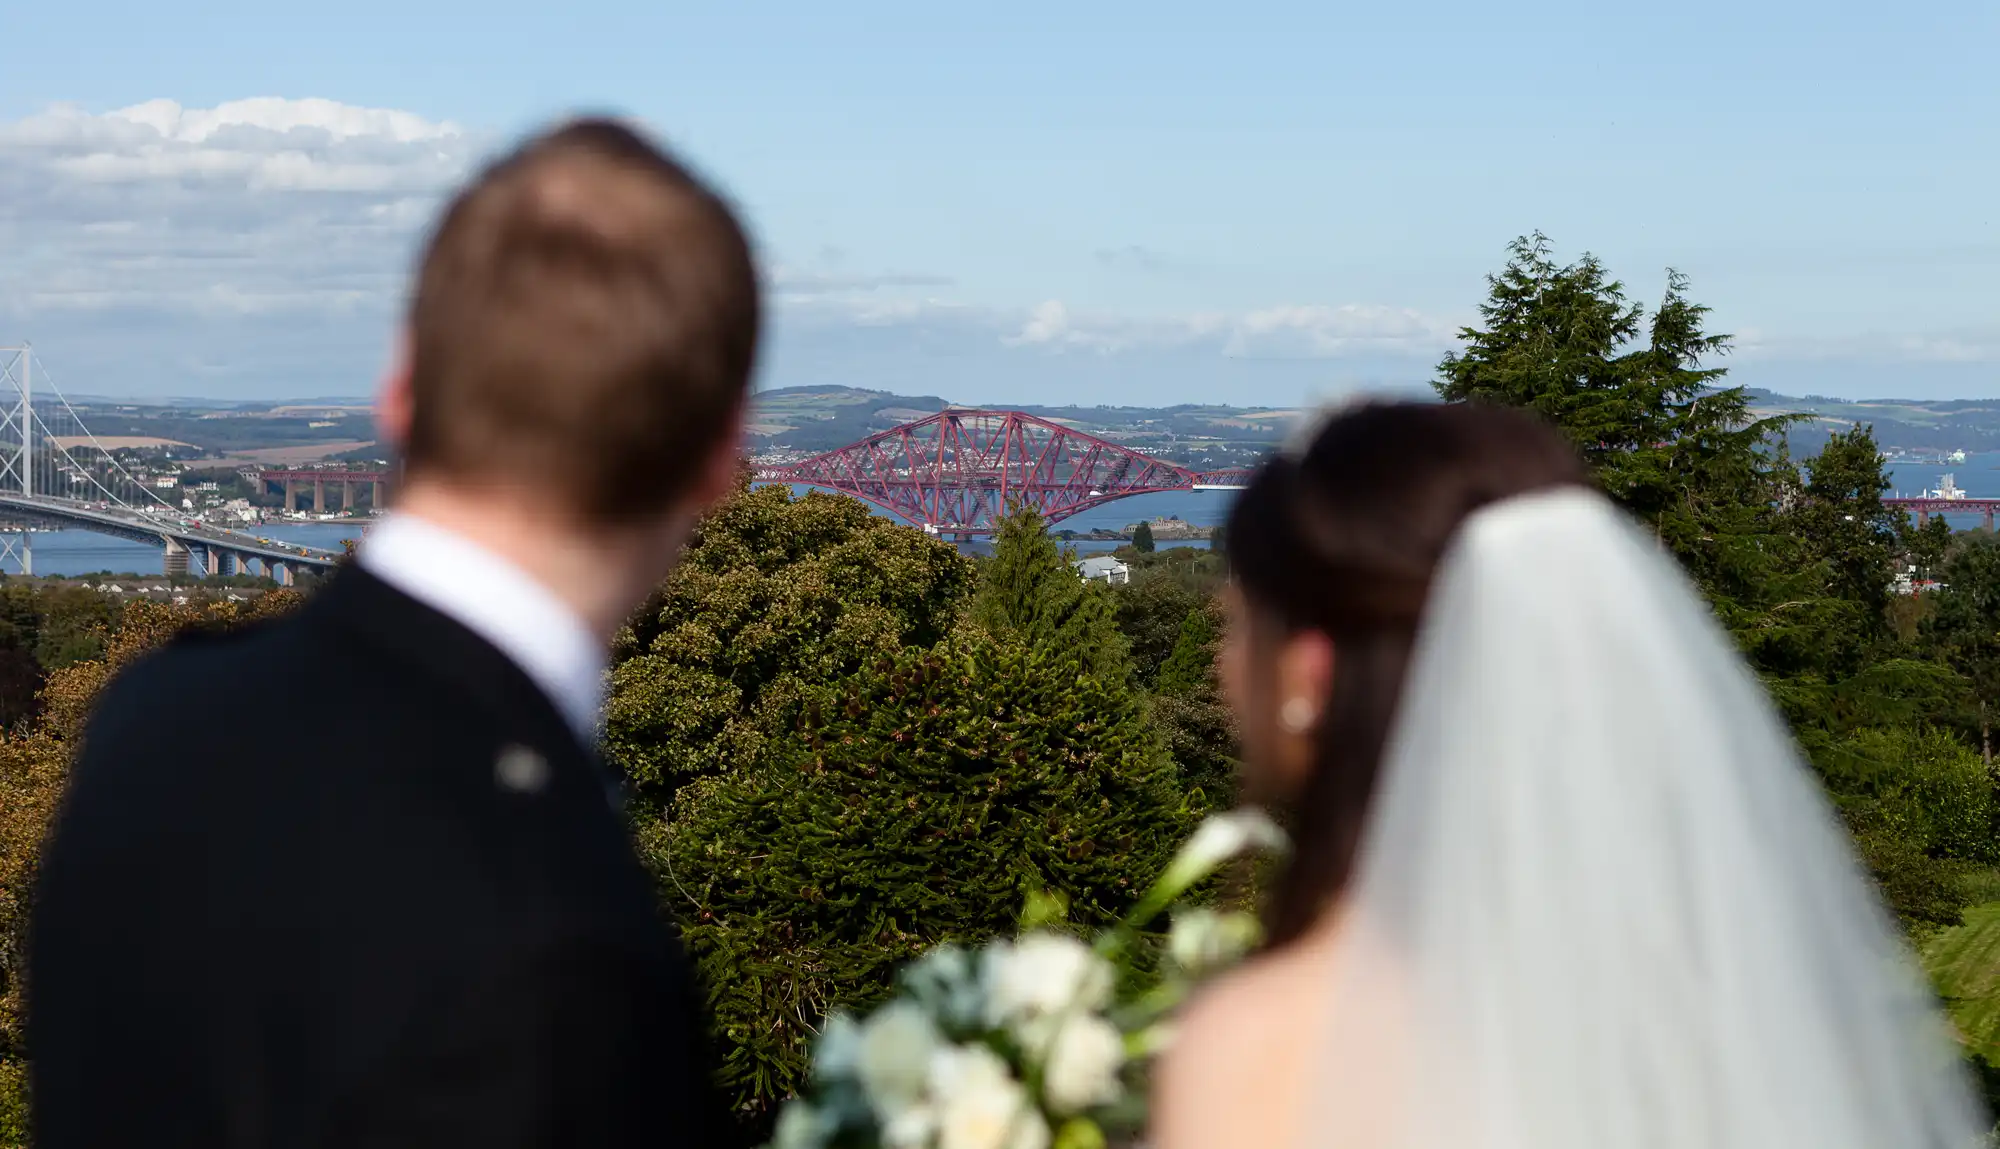 A bride and groom, viewed from behind, overlook a scenic view featuring the forth bridge and lush greenery.